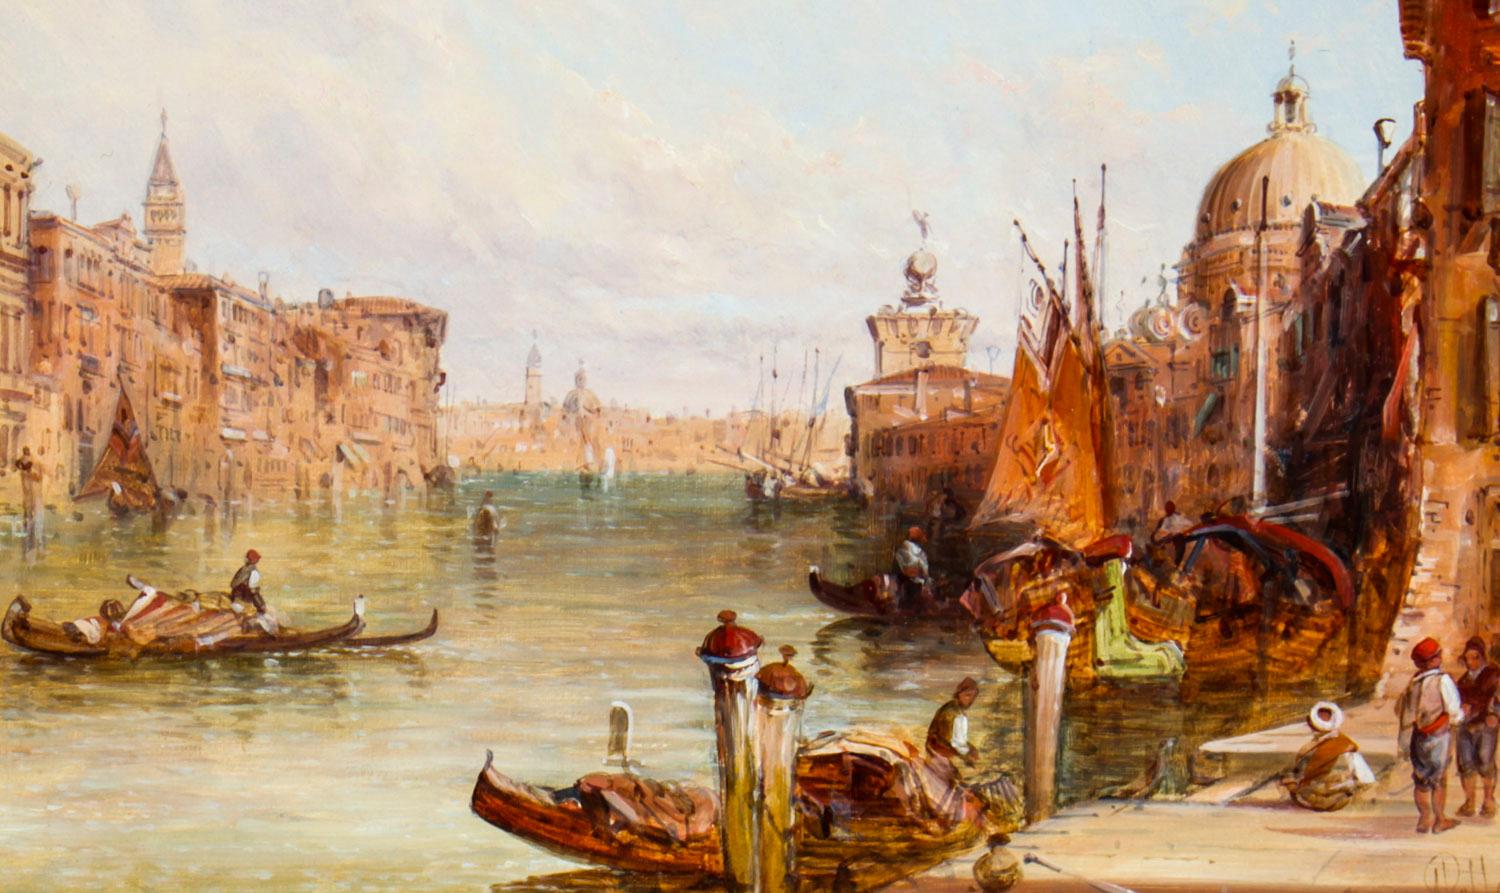 This is a beautiful oil on canvas paintings of the view of the Grand Canal in Venice by the renowned British artist Alfred Pollentine (1836-1890) and is signed lower right 